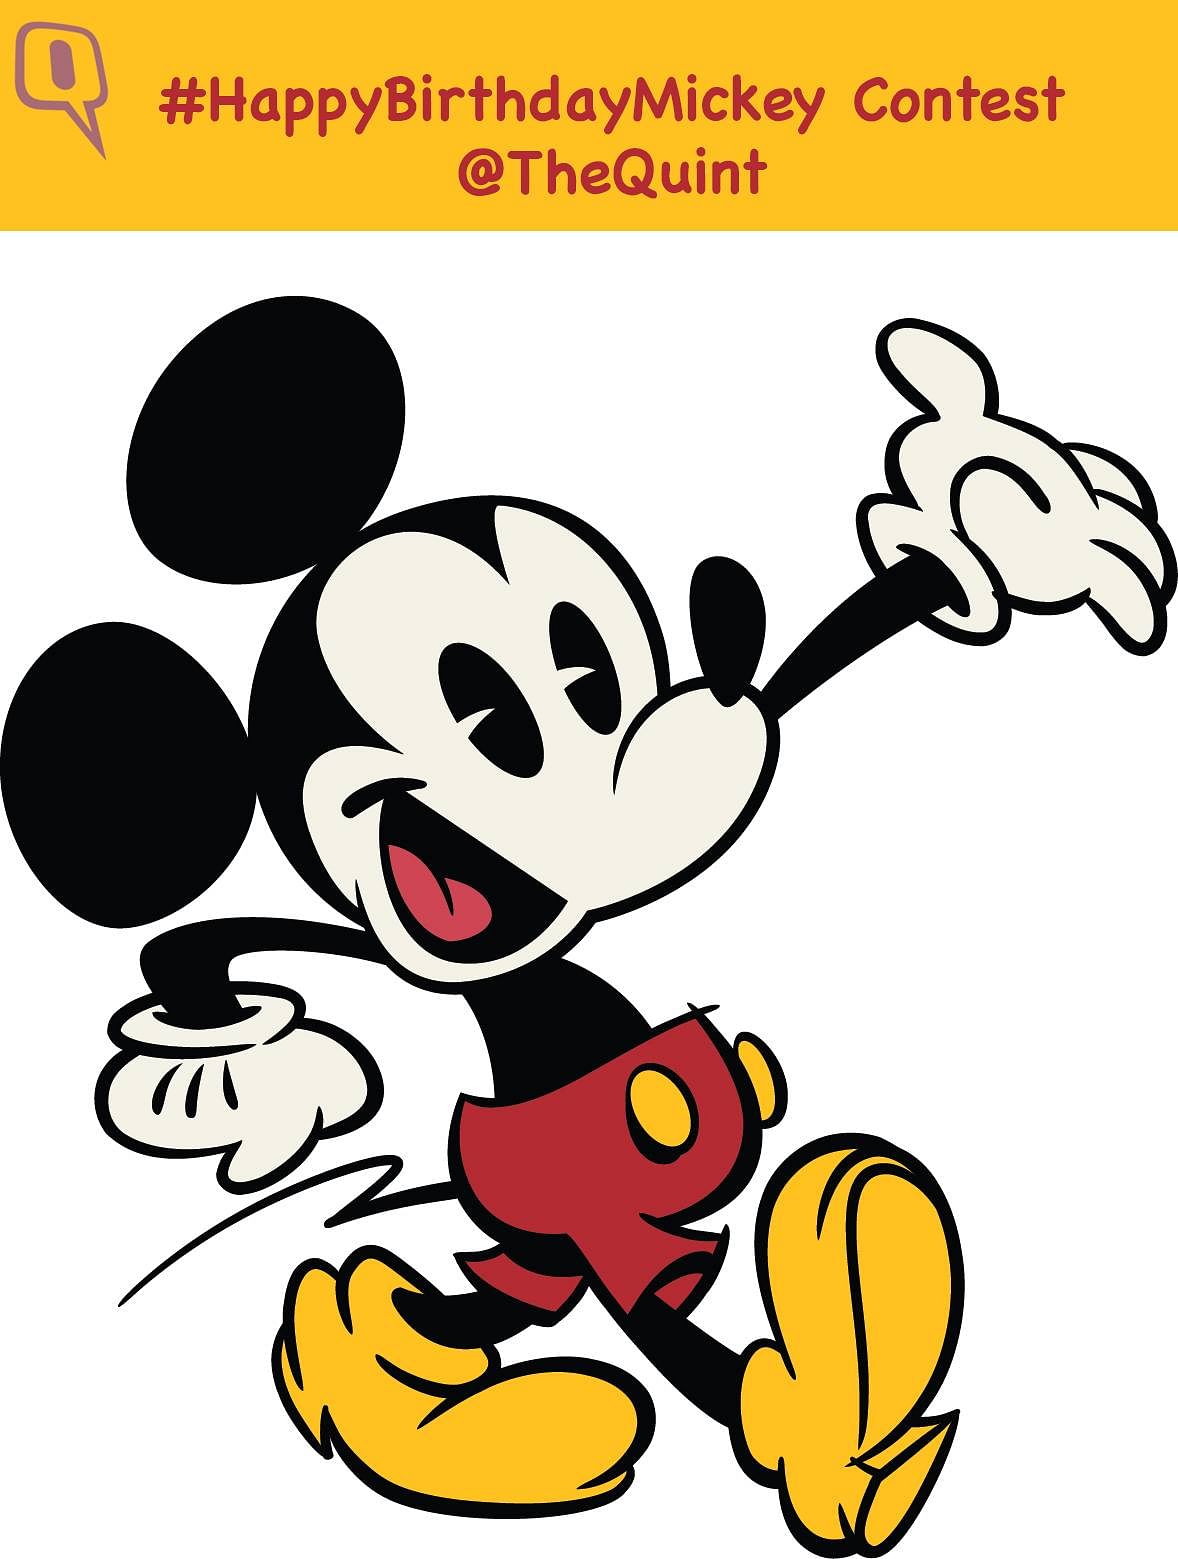 Grab this opportunity to win exclusive Mickey Mouse merchandise worth Rs 25,000!